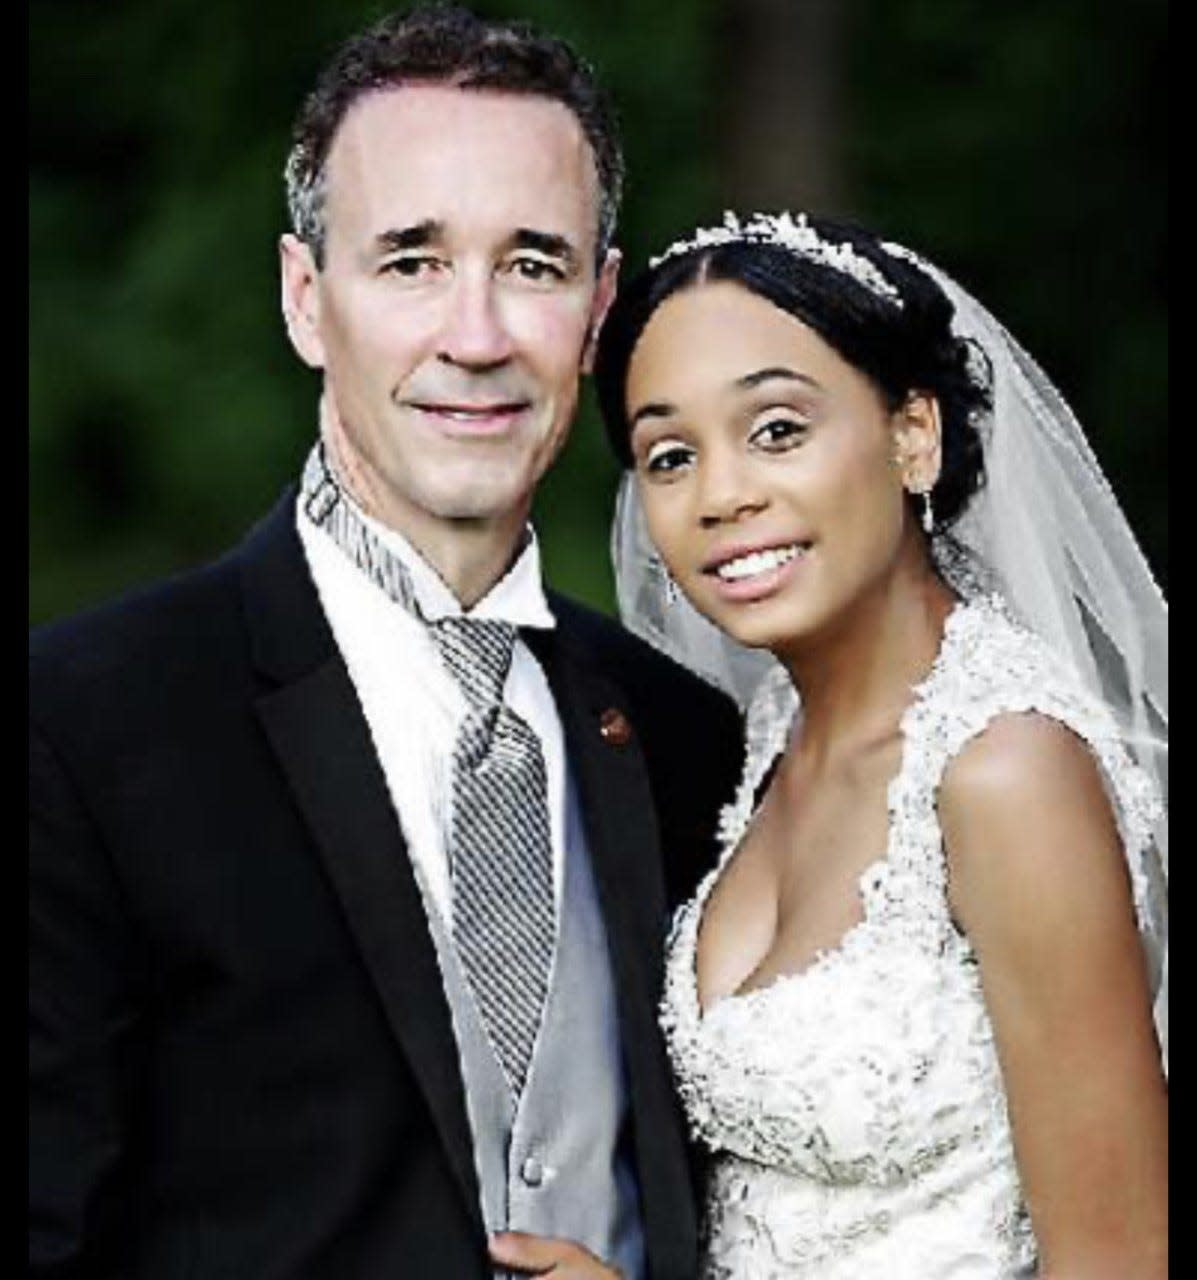 Joe Morrissey married Myrna Pride in 2016 and separated three years later. They have three young children.